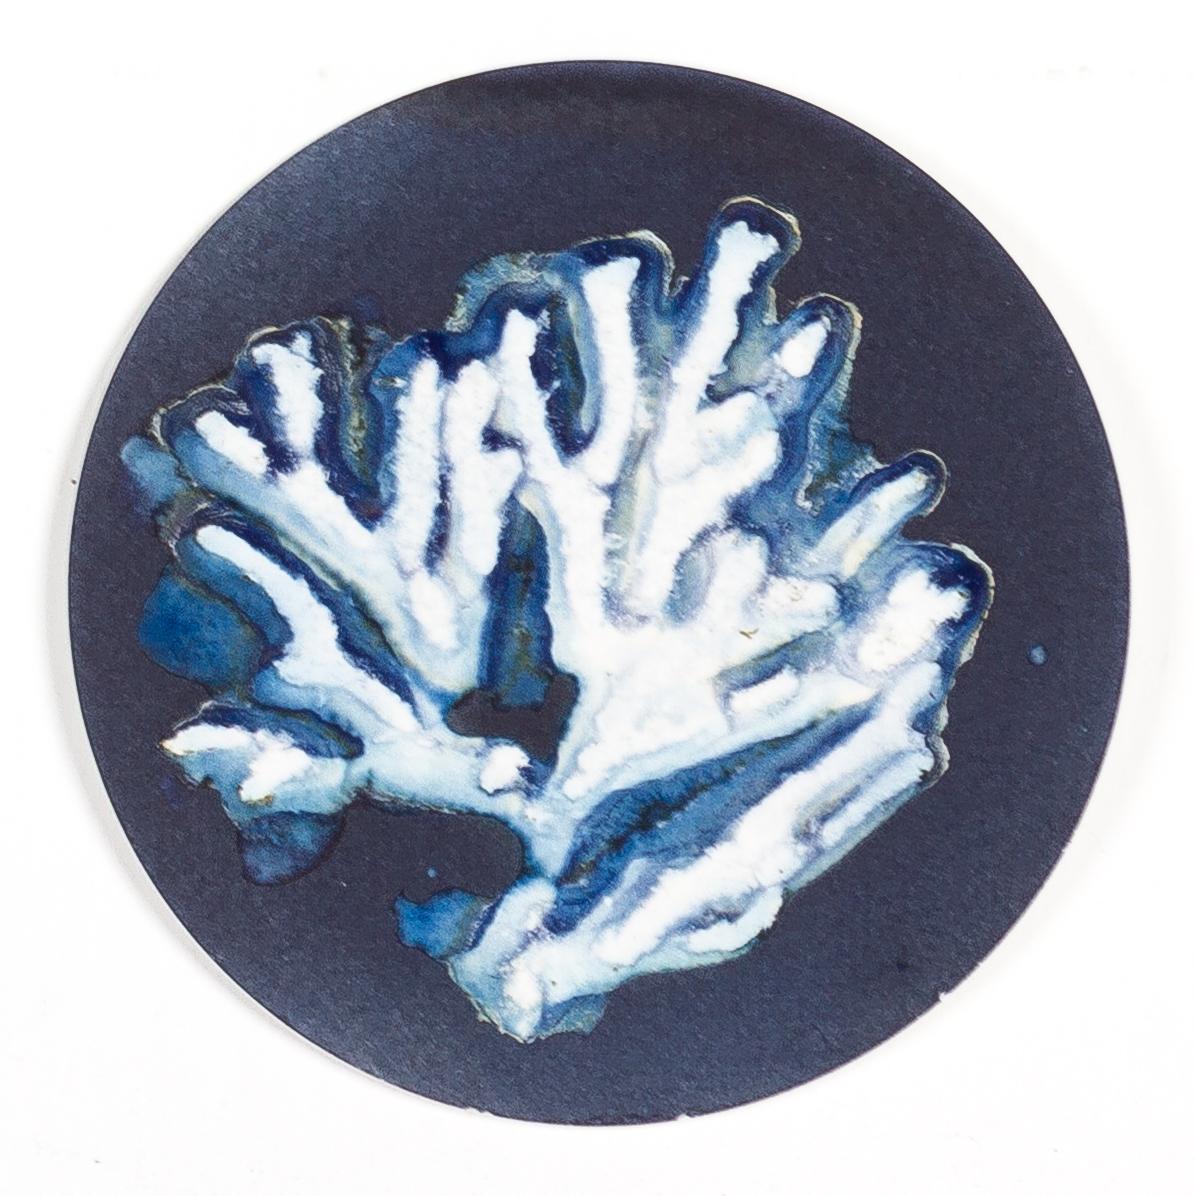 Algas 11, 22 y 67. Cyanotype photograhs mounted in high resistance glass dish - Sculpture by Paola Davila